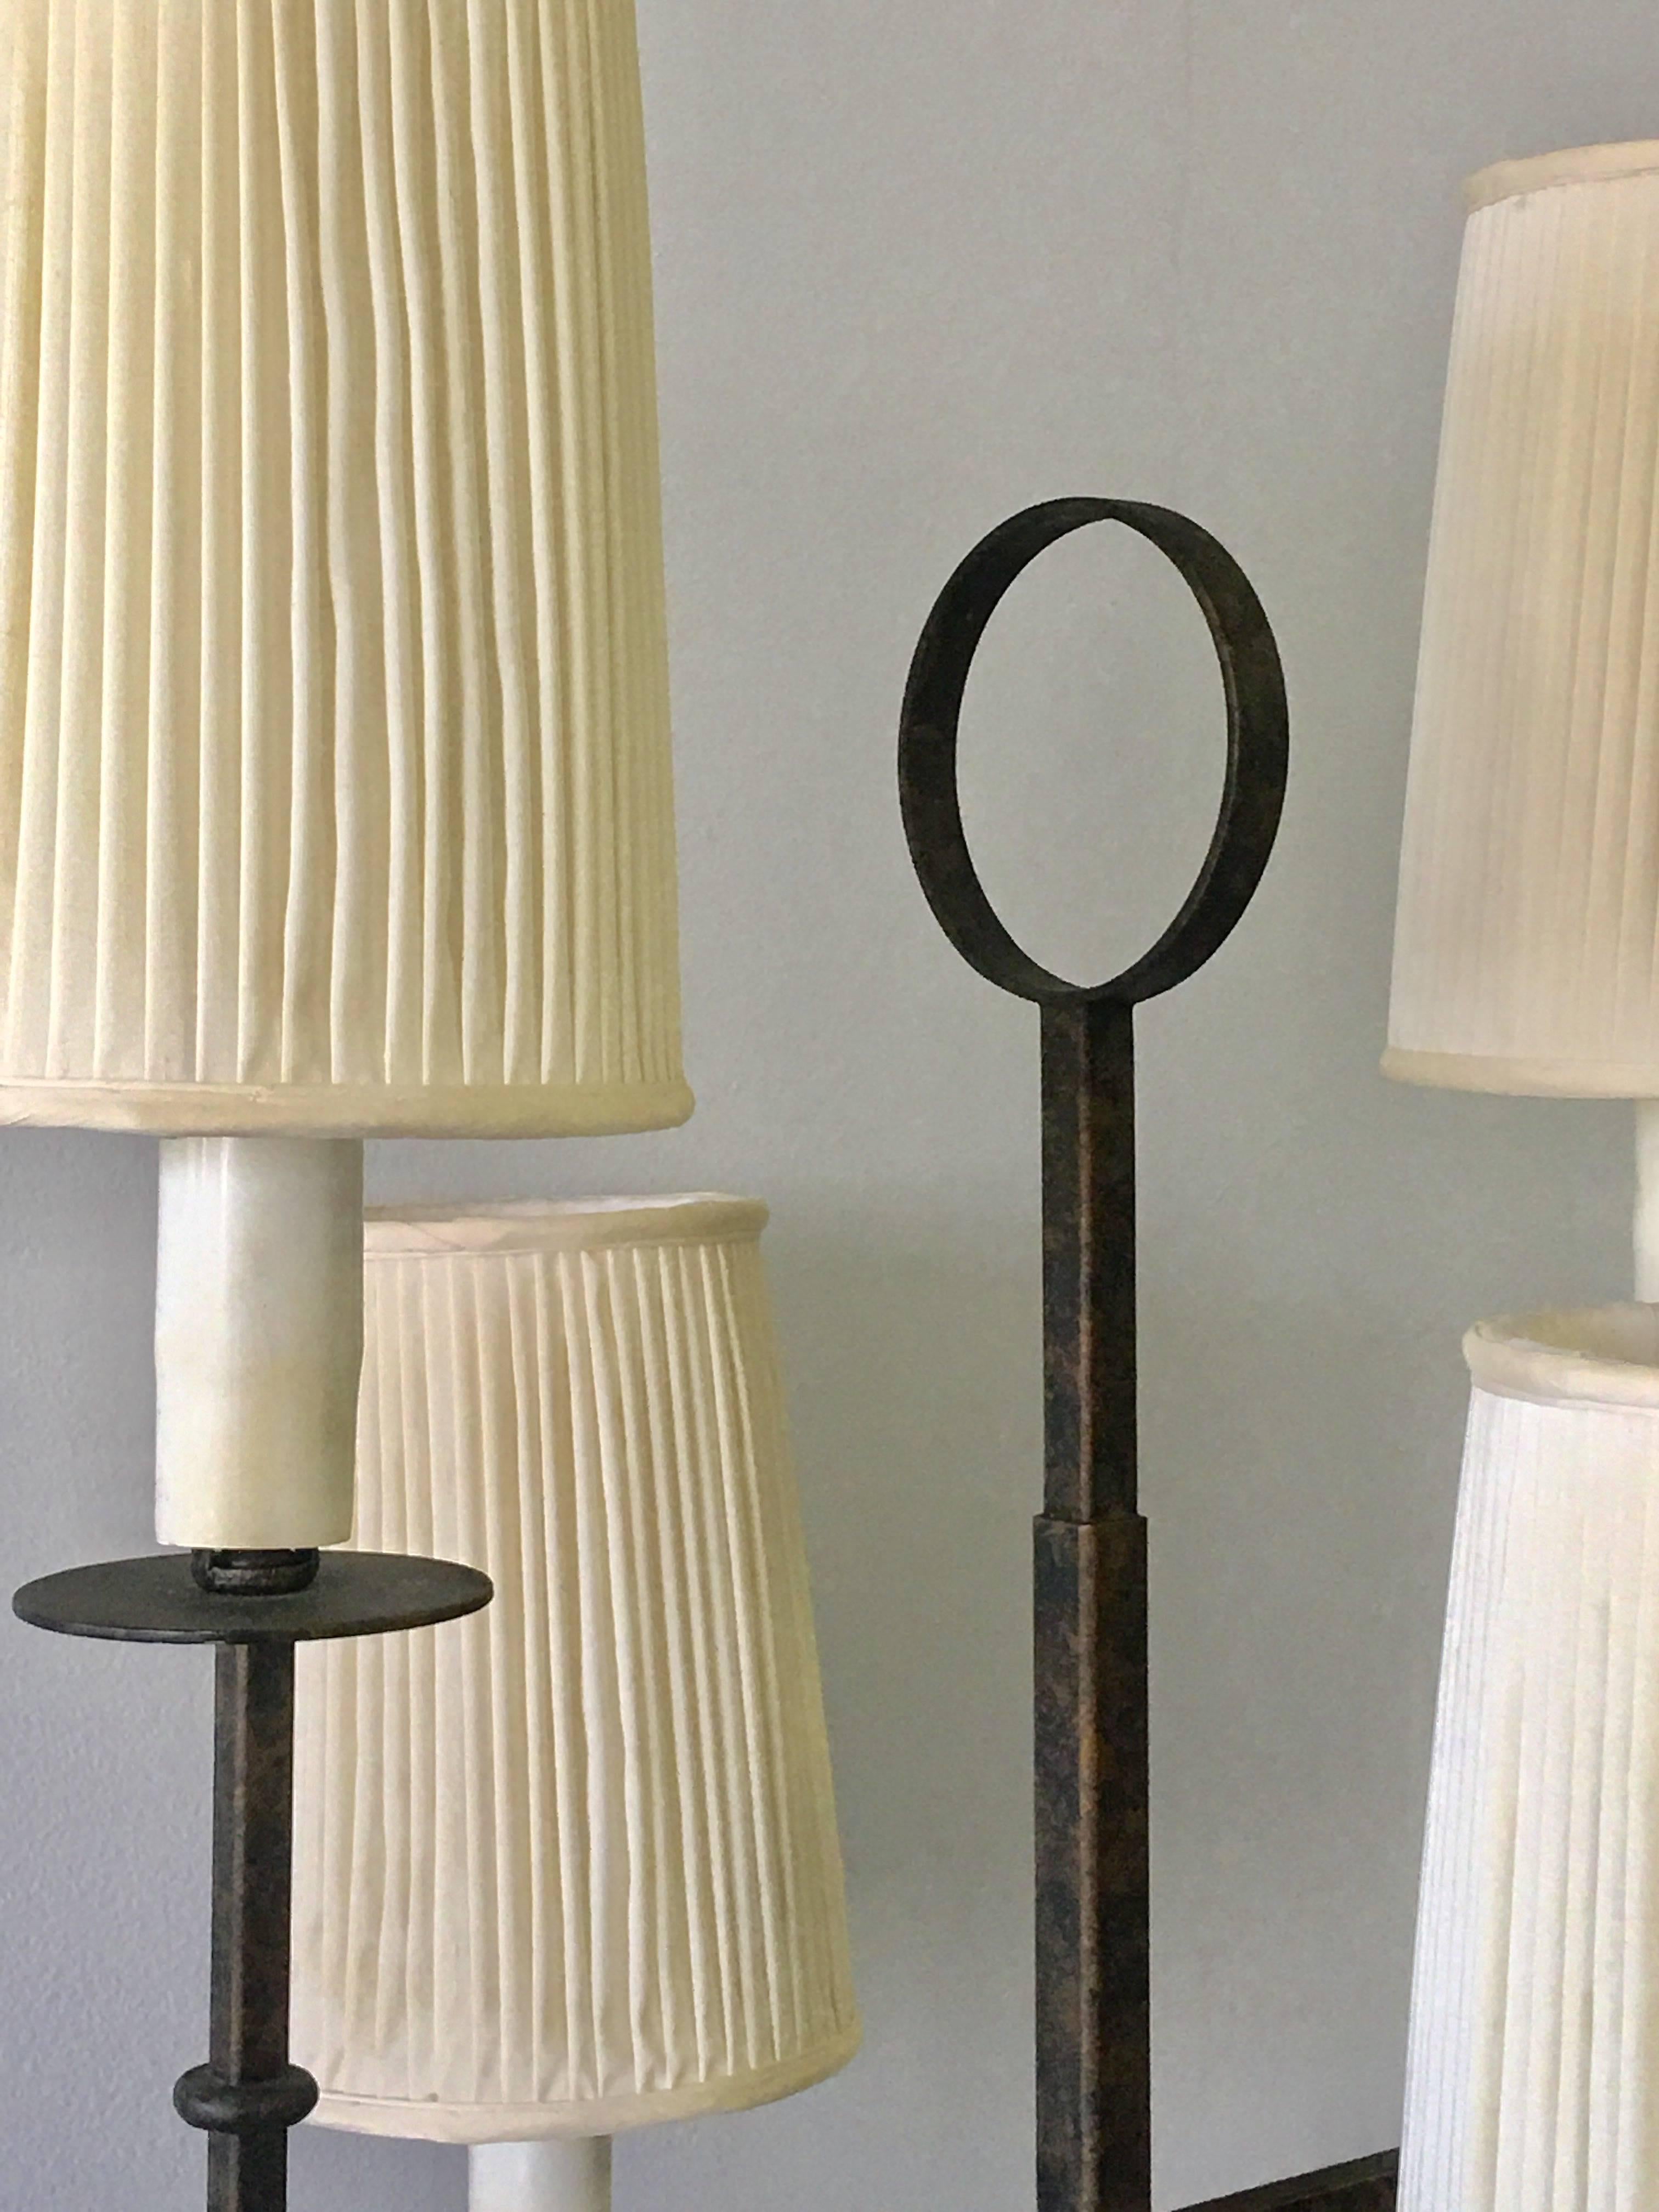 Exquisite floor lamp by Tommi Parzinger. Retains the original finish and shades. Four arms, each arm takes a regular bulb. Including the shades the floor lamp measures 18